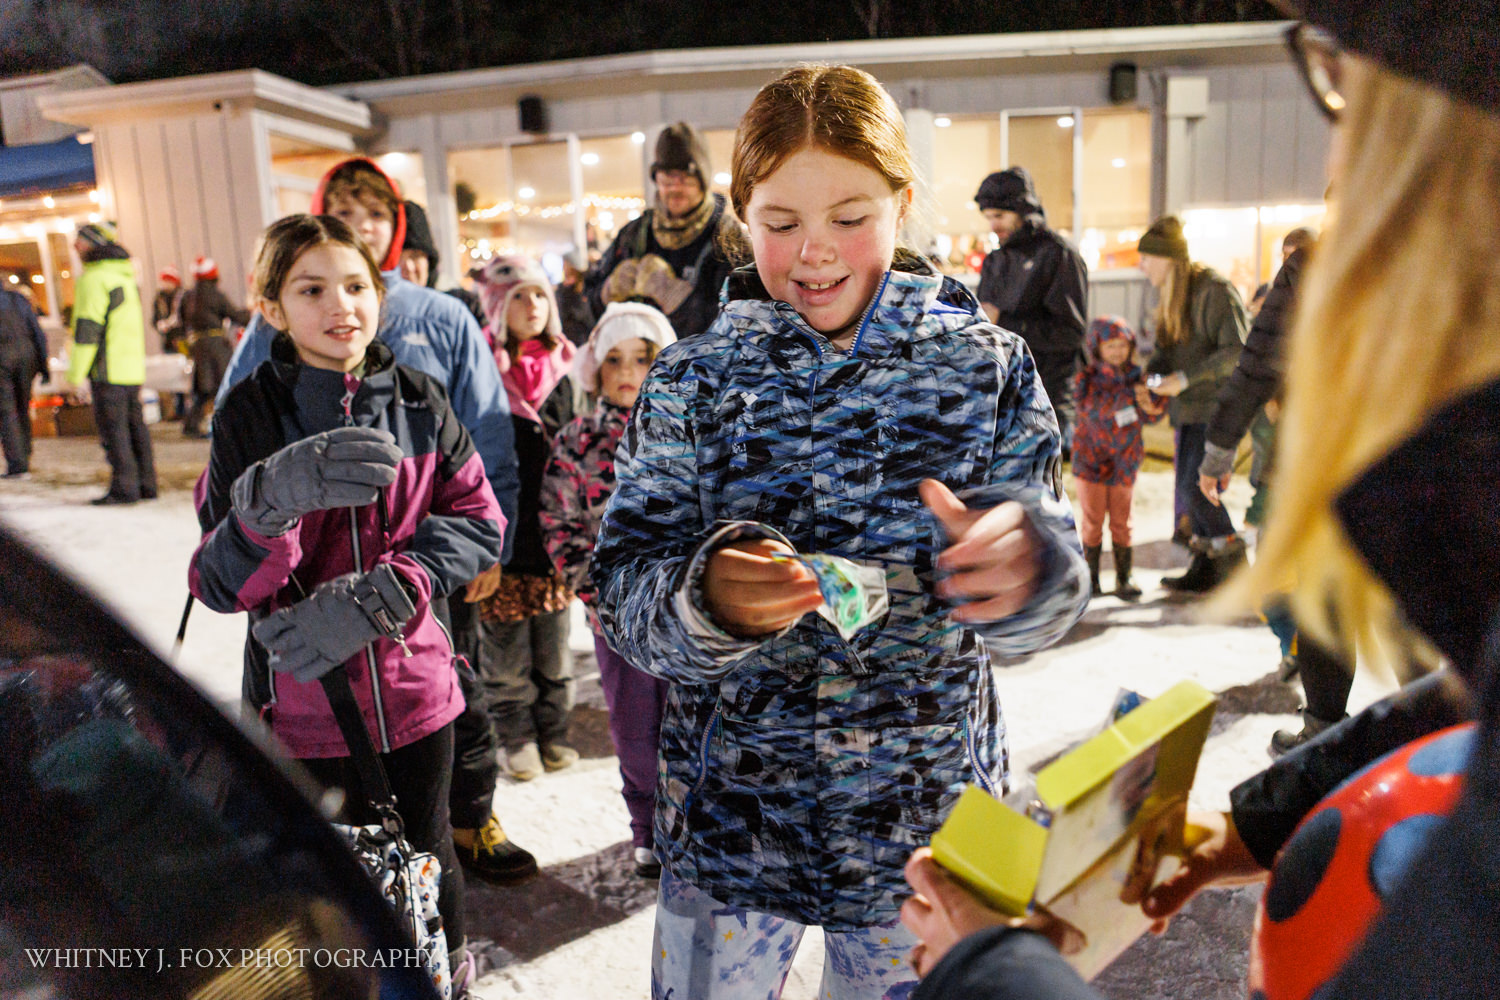 208 winter kids welcome to winter 2022 lost valley auburn maine documentary event photographer whitney j fox 3133 w